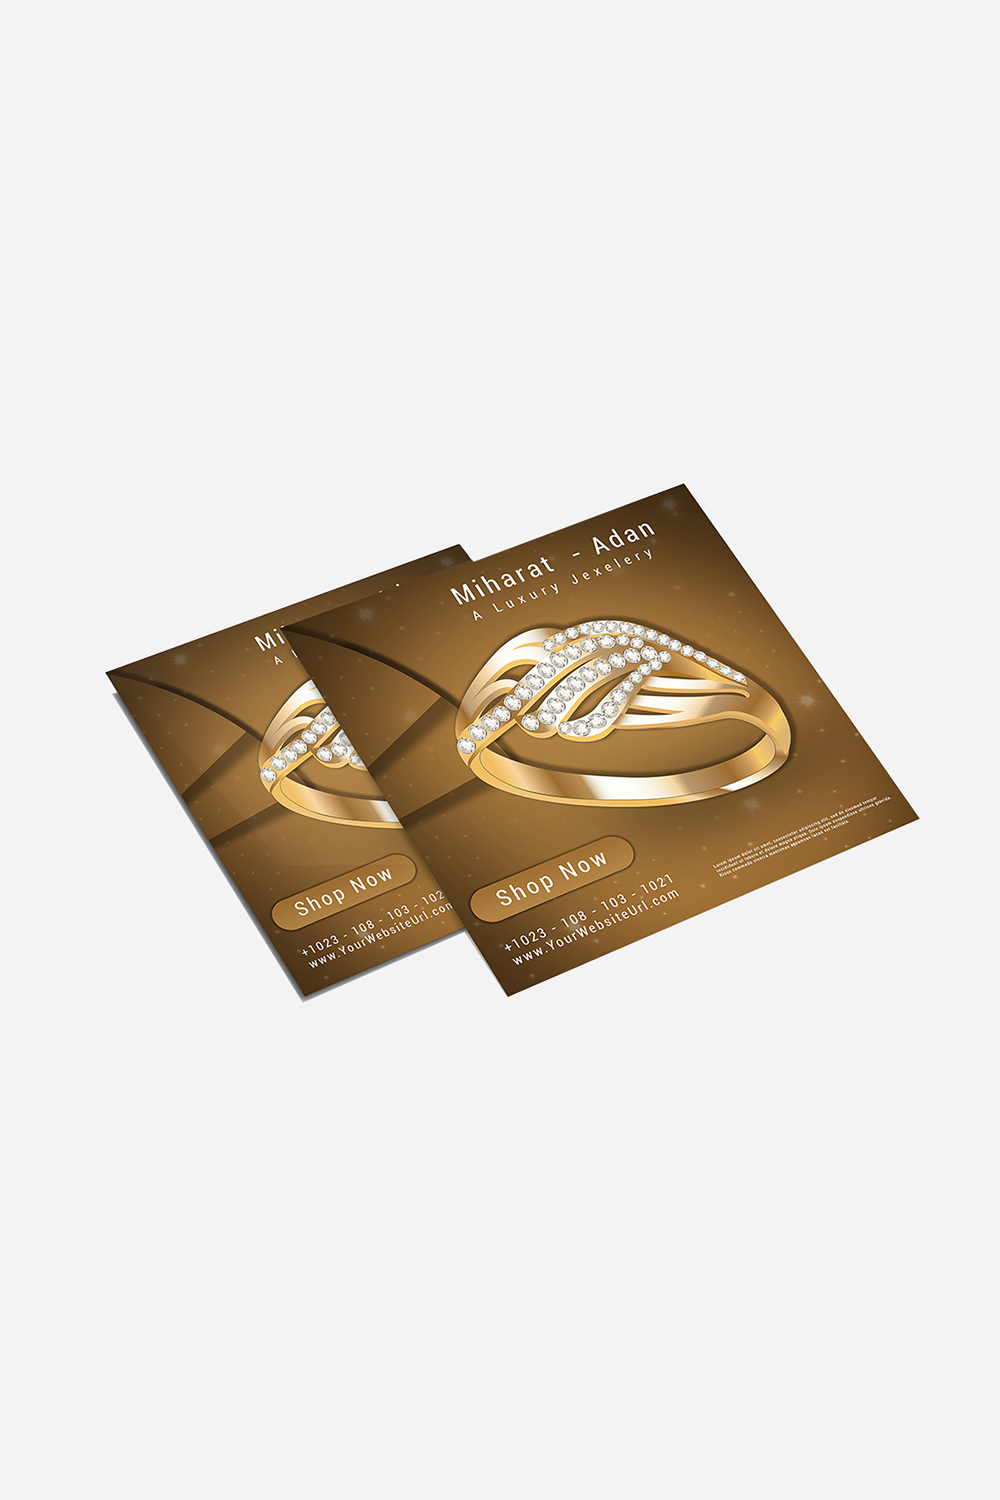 Jewellery promotion poster design pinterest preview image.